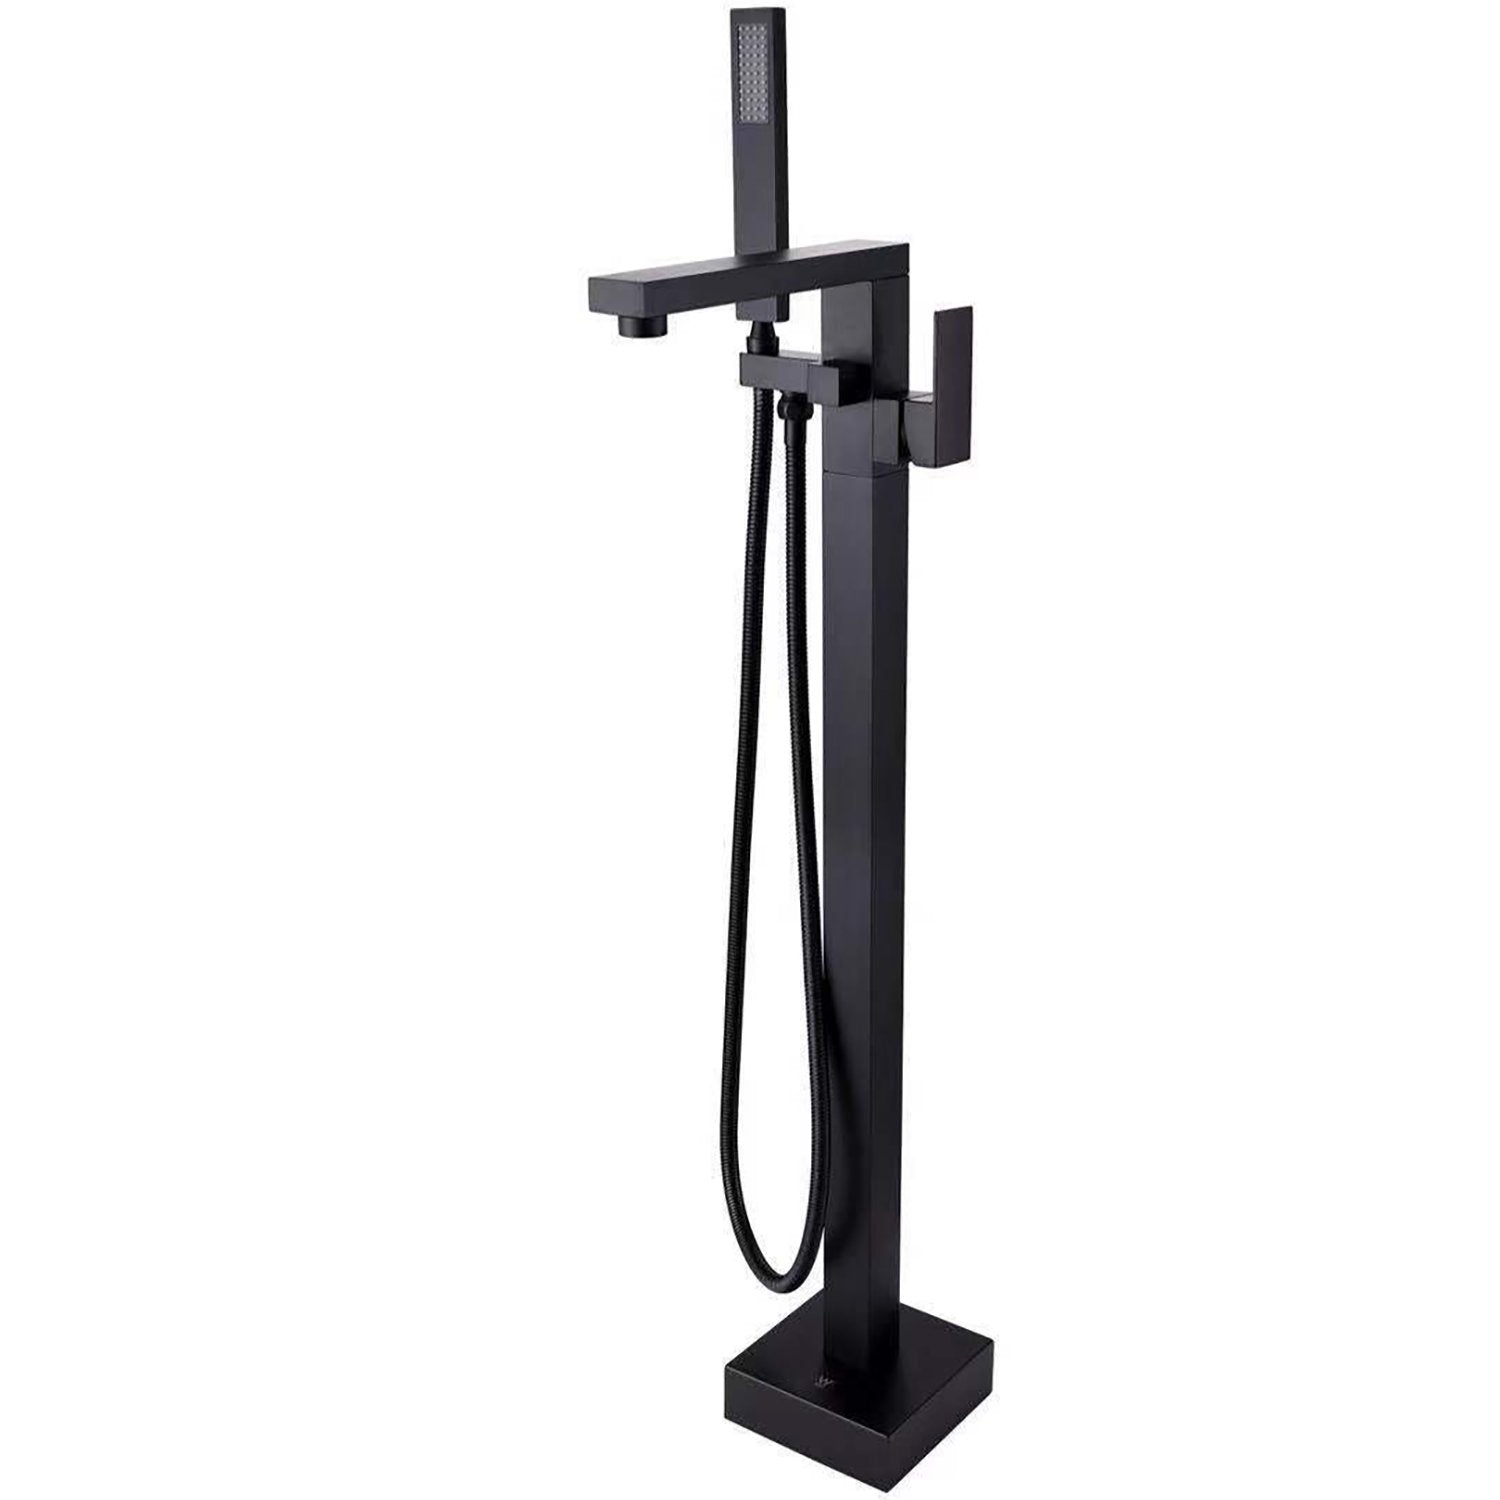 2-Handle Claw Foot Freestanding Tub Faucet with Hand Shower Floor Mount Bathtub Faucet in Matte Black - Alipuinc